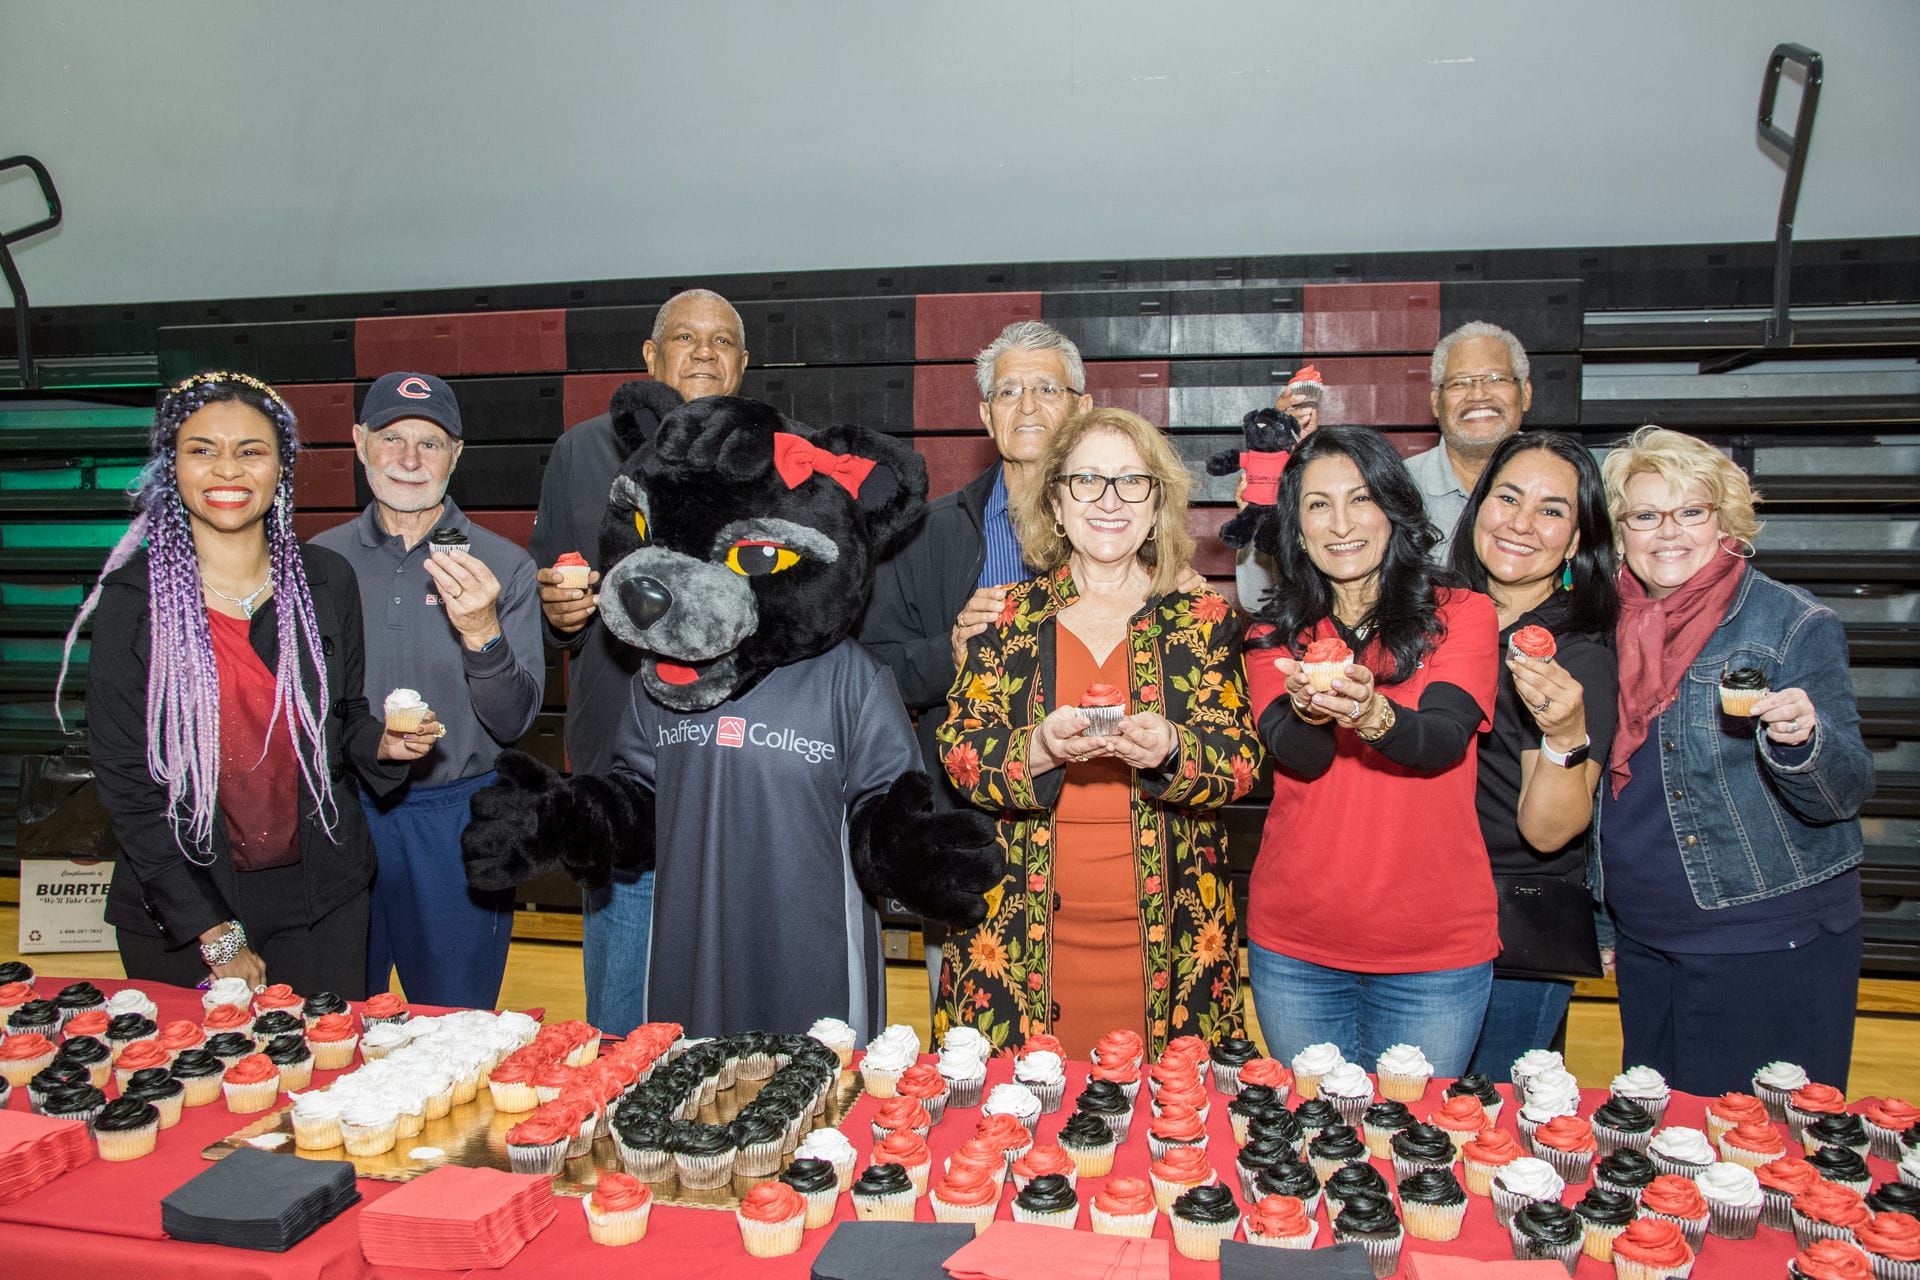 Chaffey College staff members holding cup cakes